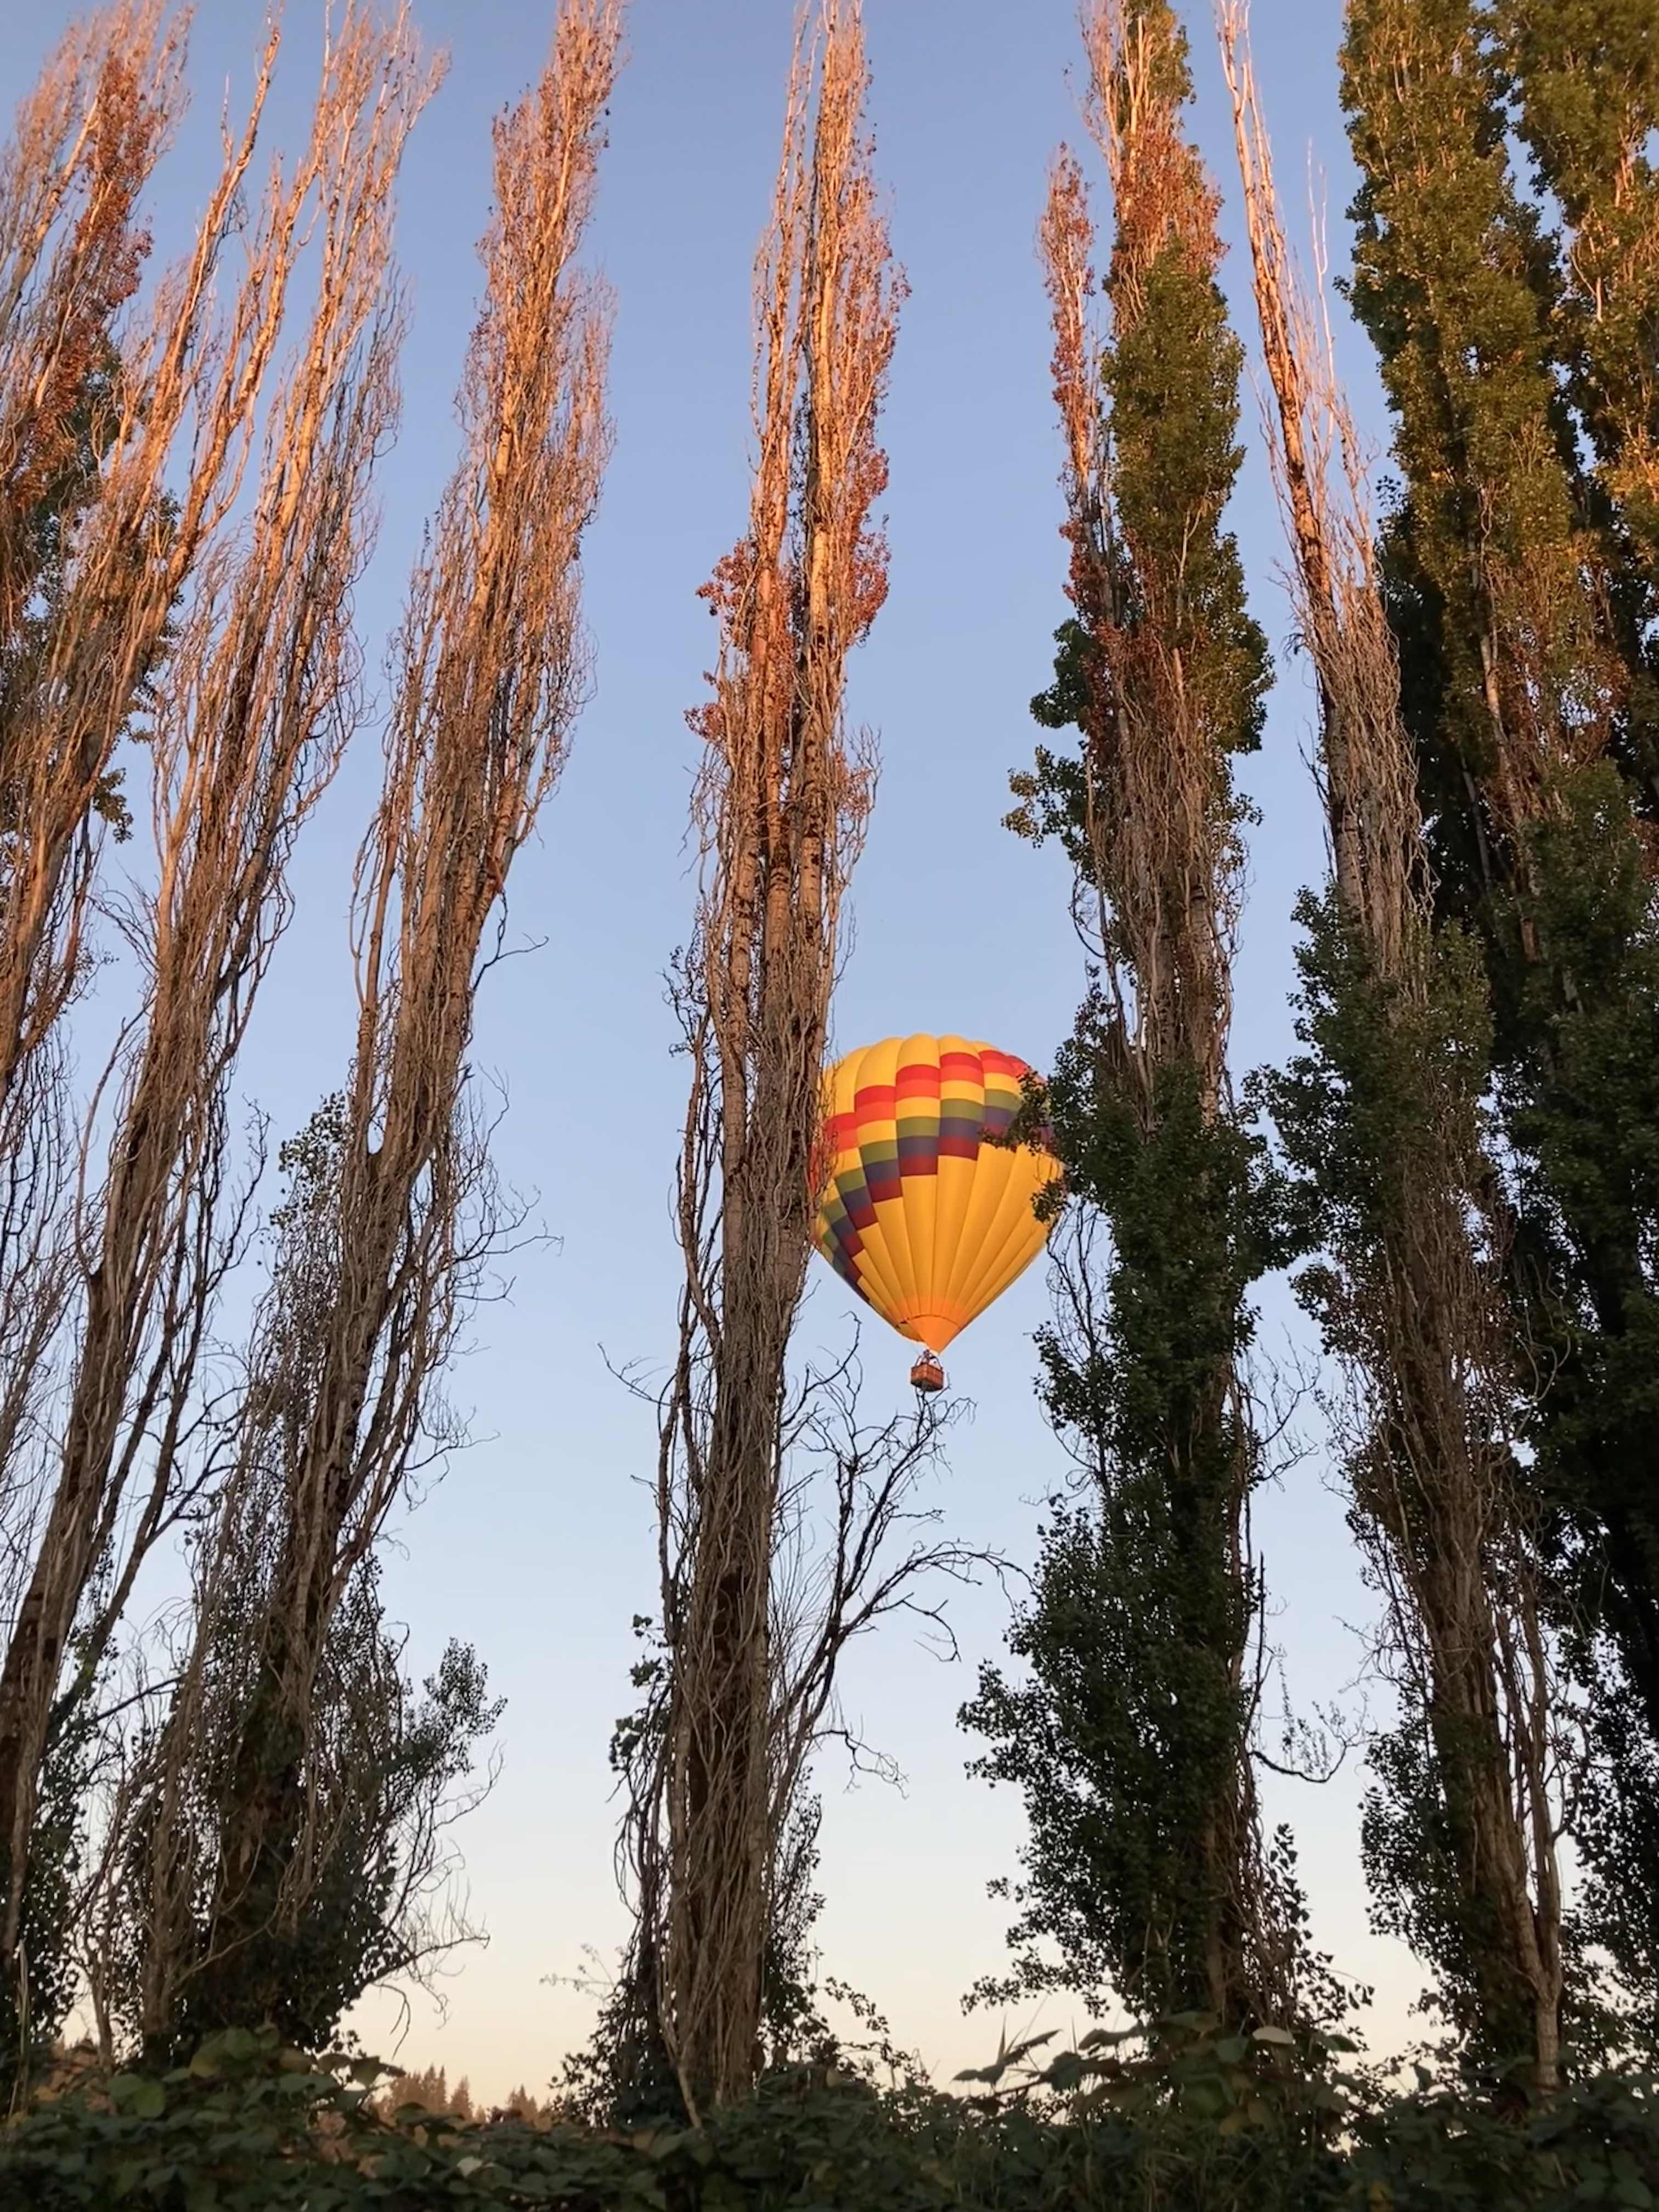 At sunset, with light blue sky fading to yellow at the horizon behind the row of tall, skinny bush like trees with gaps and a hot air balloon a hundred or so feet off the ground seen between the trees.